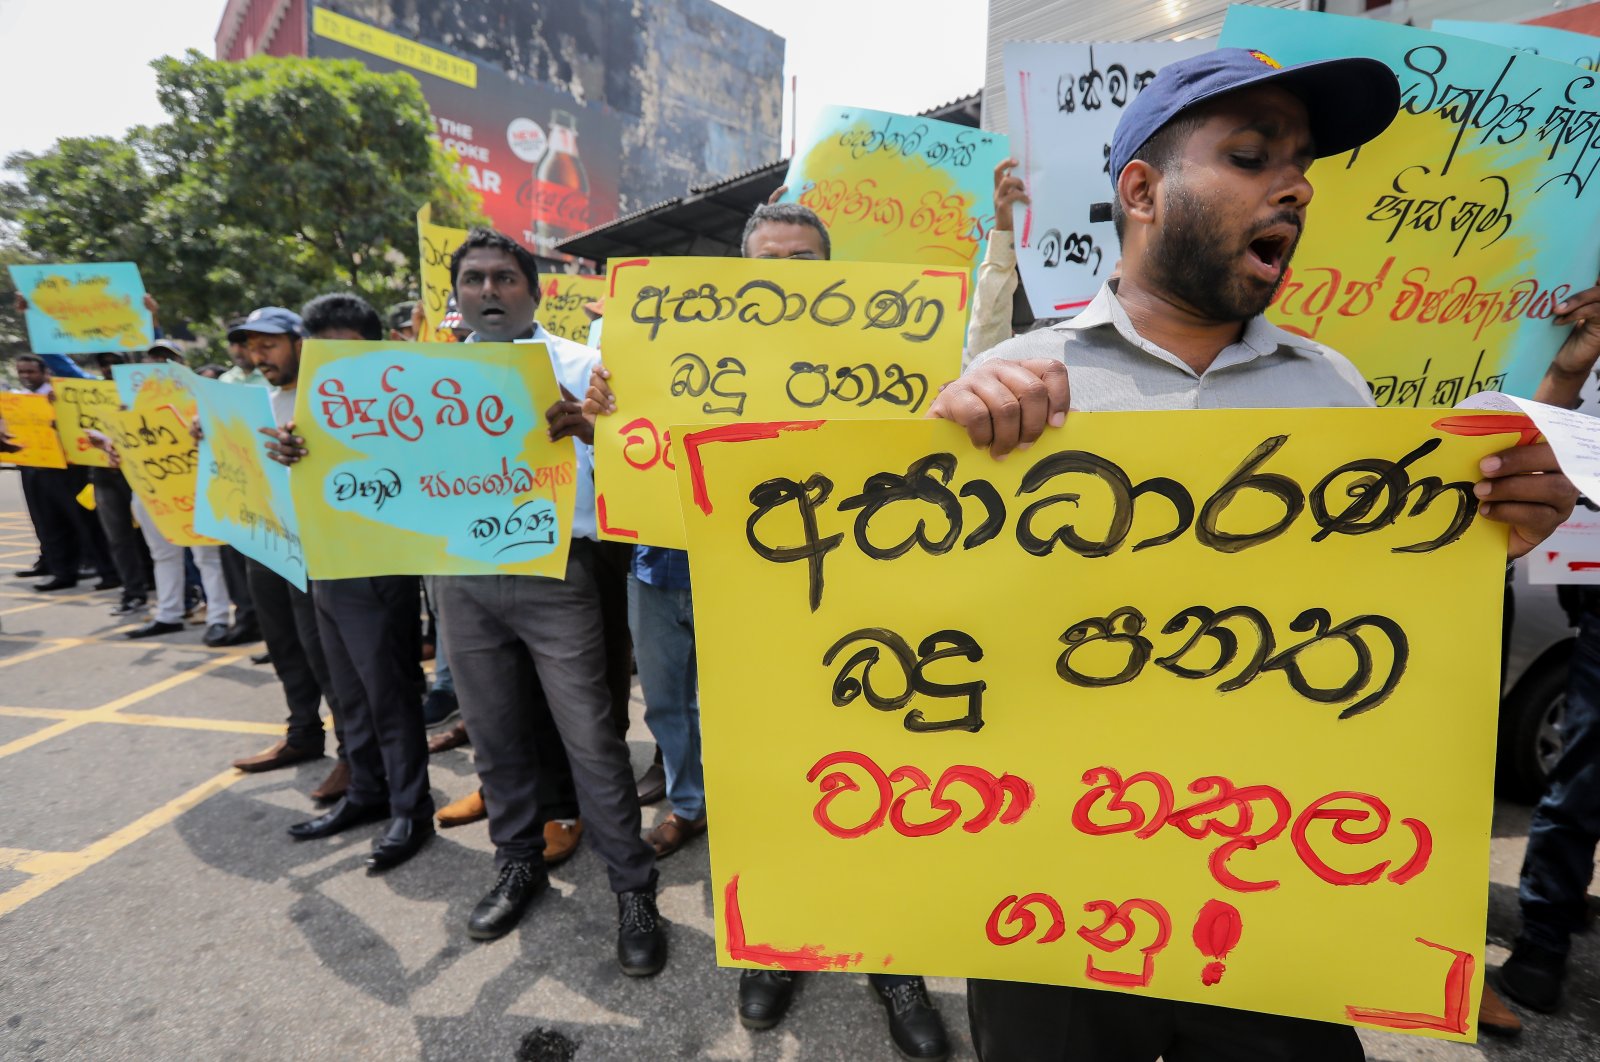 Ceylon electricity board workers shout slogans and hold placards and banners that read in the Sinhala language &#039;Repeal the unfair tax bill immediately&#039; and &#039;Revise the electricity bill immediately&#039; during a protest against the electricity tariff hike and new tax regulations, in Colombo, Sri Lanka, Feb. 27, 2023. (EPA Photo)